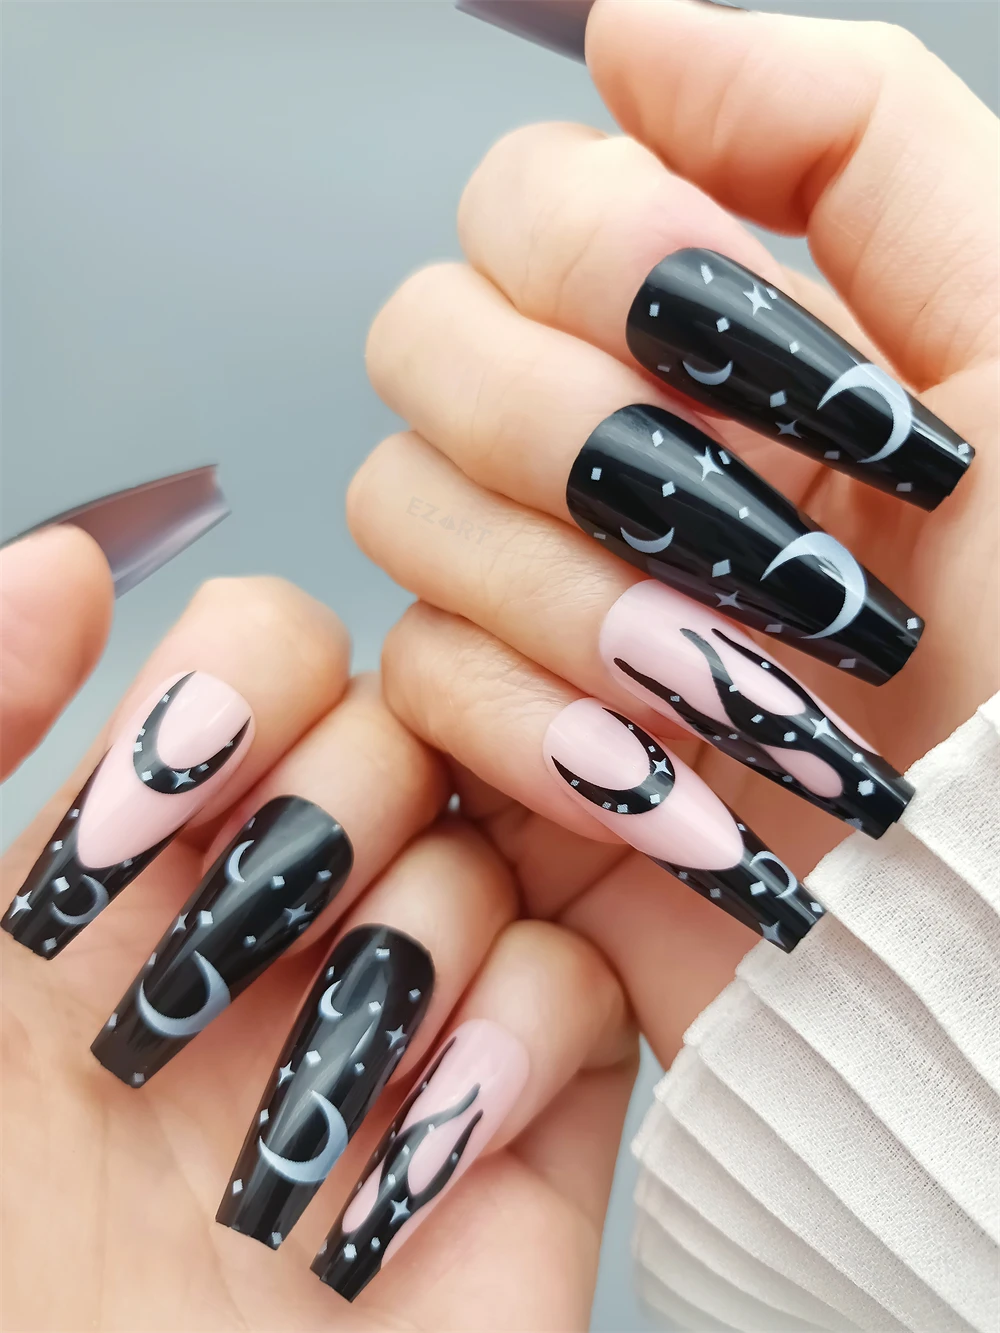 Cartoon Game Designed False Nails with Anime Cute Figure Print Press On Nails Set Coffin Long Black Matte for Theme Party 24pcs images - 6